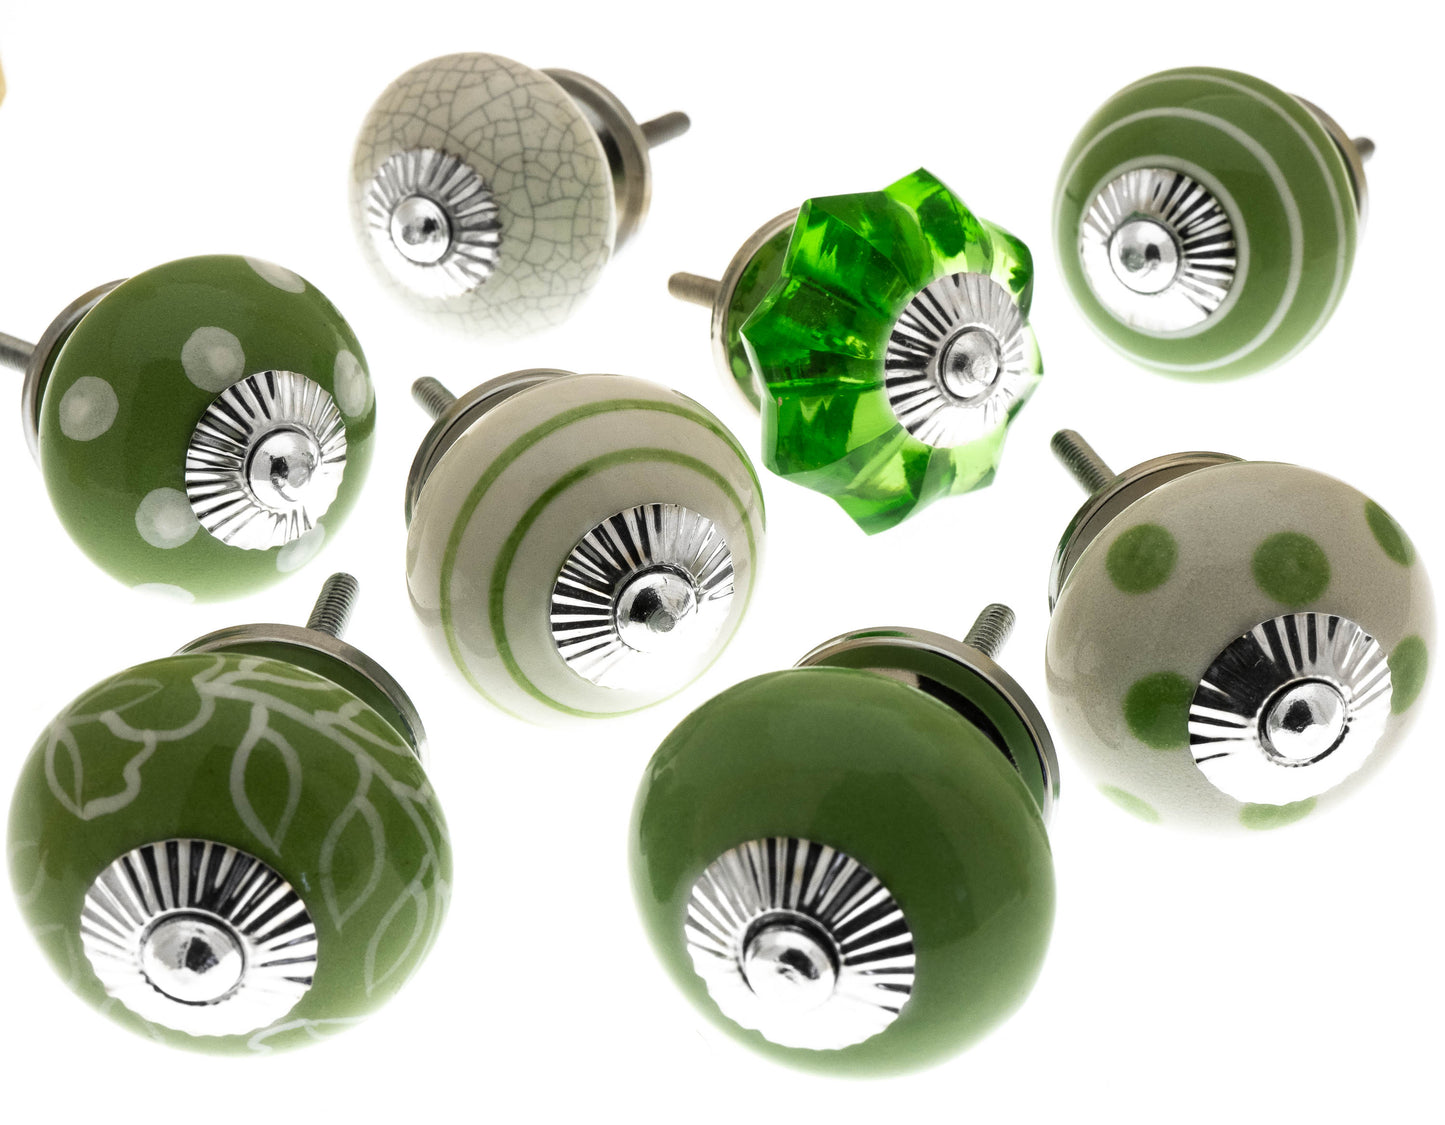 Ceramic and Glass Cupboard Knobs in Bright Green Designs - Set of 8